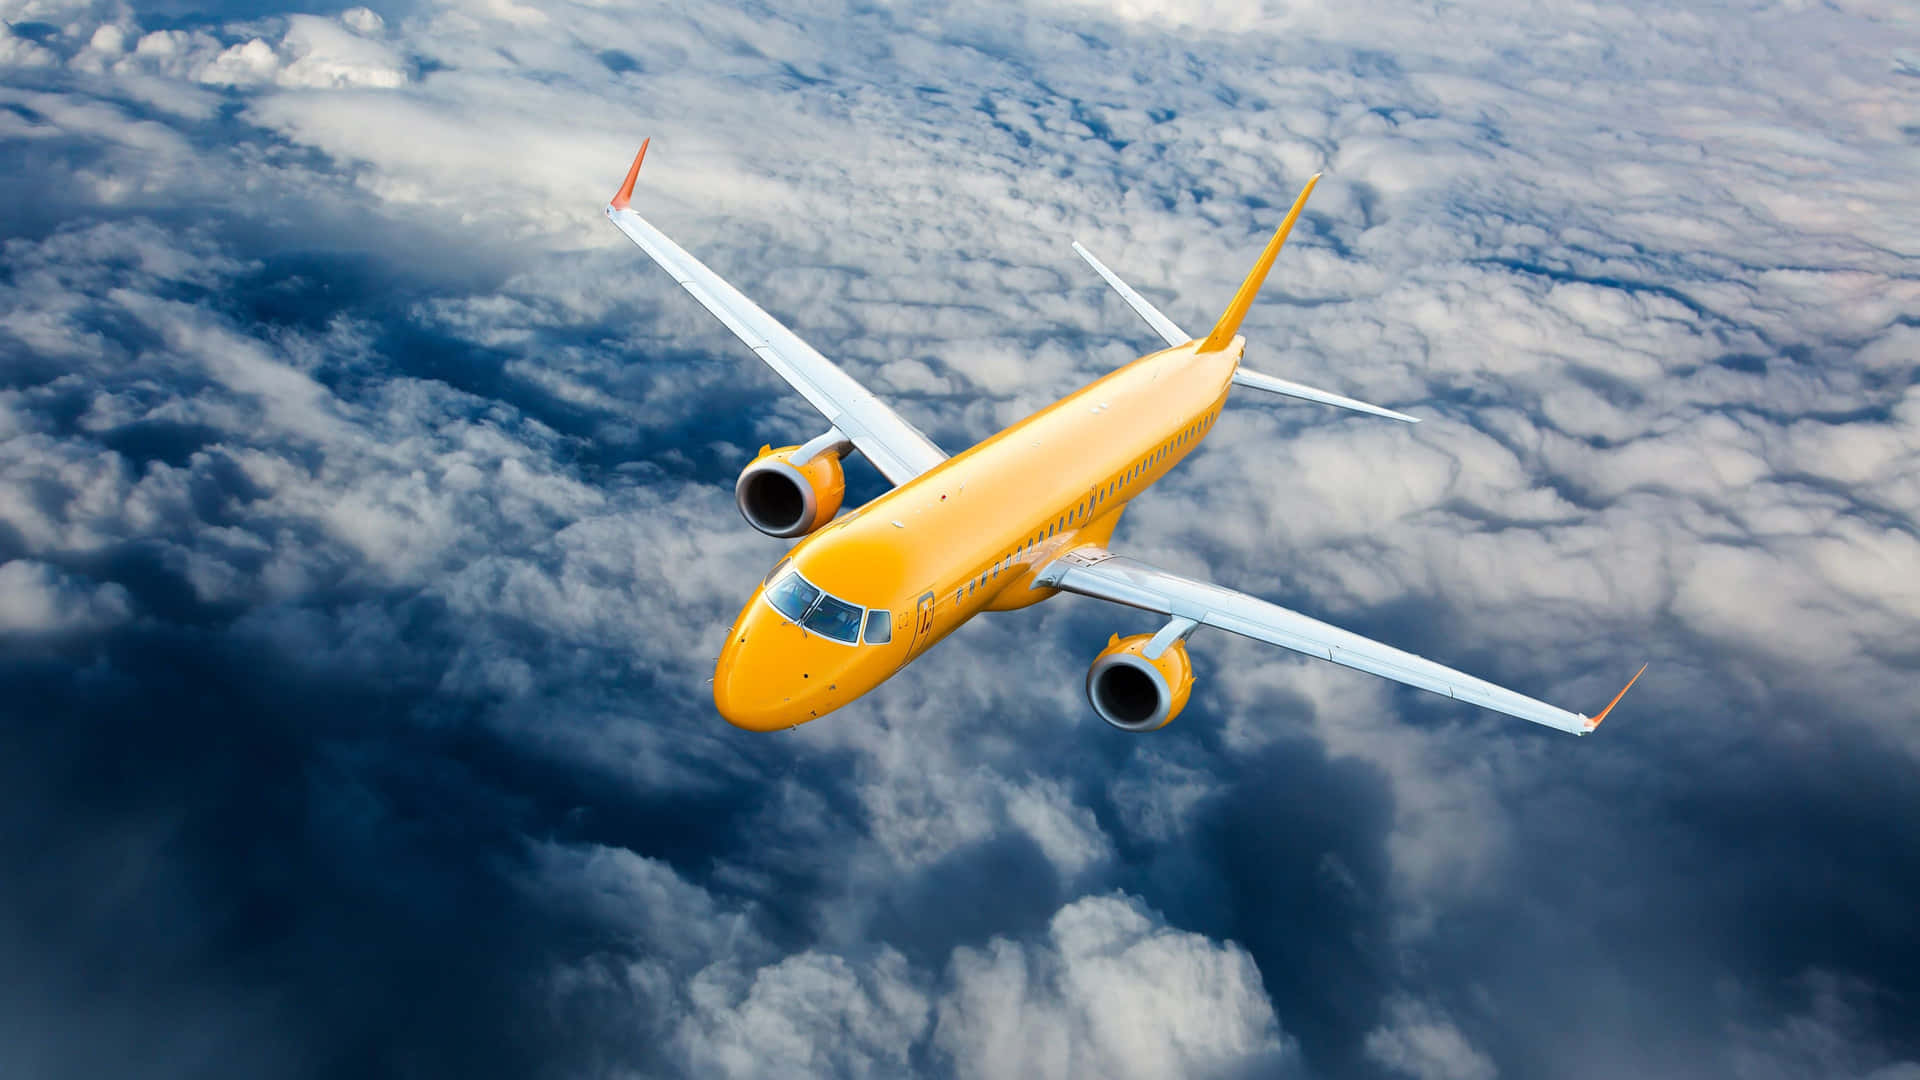 A Yellow Airplane Flying In The Sky Wallpaper